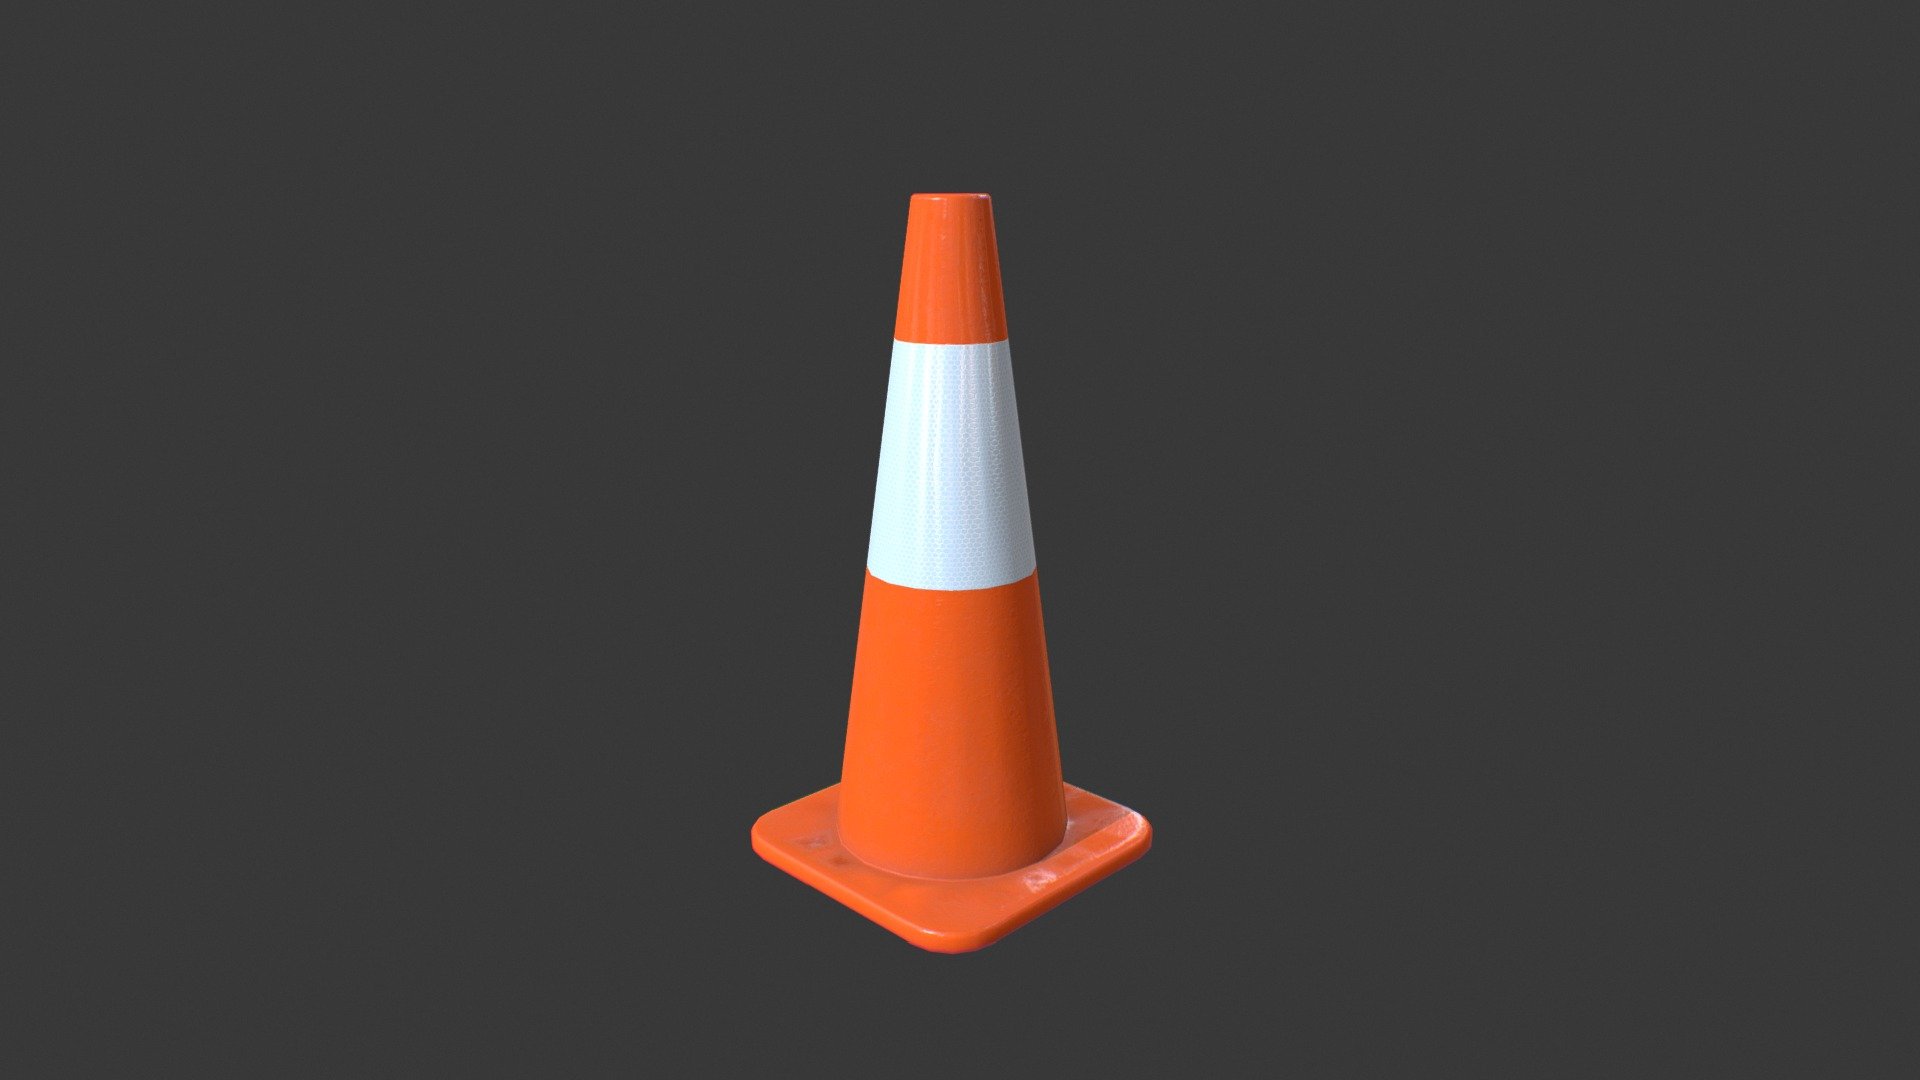 A high quality, low-poly 3d model ready for Virtual Reality (VR), Augmented Reality (AR), games and other real-time apps.

This is a traffic cone which i created, which you can use in game, architecture or ur own project. This traffic cone 3D model contain 2 version of texture which is clean version and dirty version.
Polycount: 784 tris
Texture Format: PNG, BMP
Textures are created using PBR Metalness workflow in Substance Painter.

Following textures map are provided with texture size of 4096x4096px: BaseColor, Roughness, Metalness, Normal_OpenGL, Normal_DX, AO, Glossiness, Specular. However, you can reduce size of the map to suit your project without affect the texture detail.

Repacking or selling by other persons is strictly not allowed! Thank you and appreciated it. CHEERS! - Traffic Cone 1 Low Poly - Buy Royalty Free 3D model by patrickart90 3d model